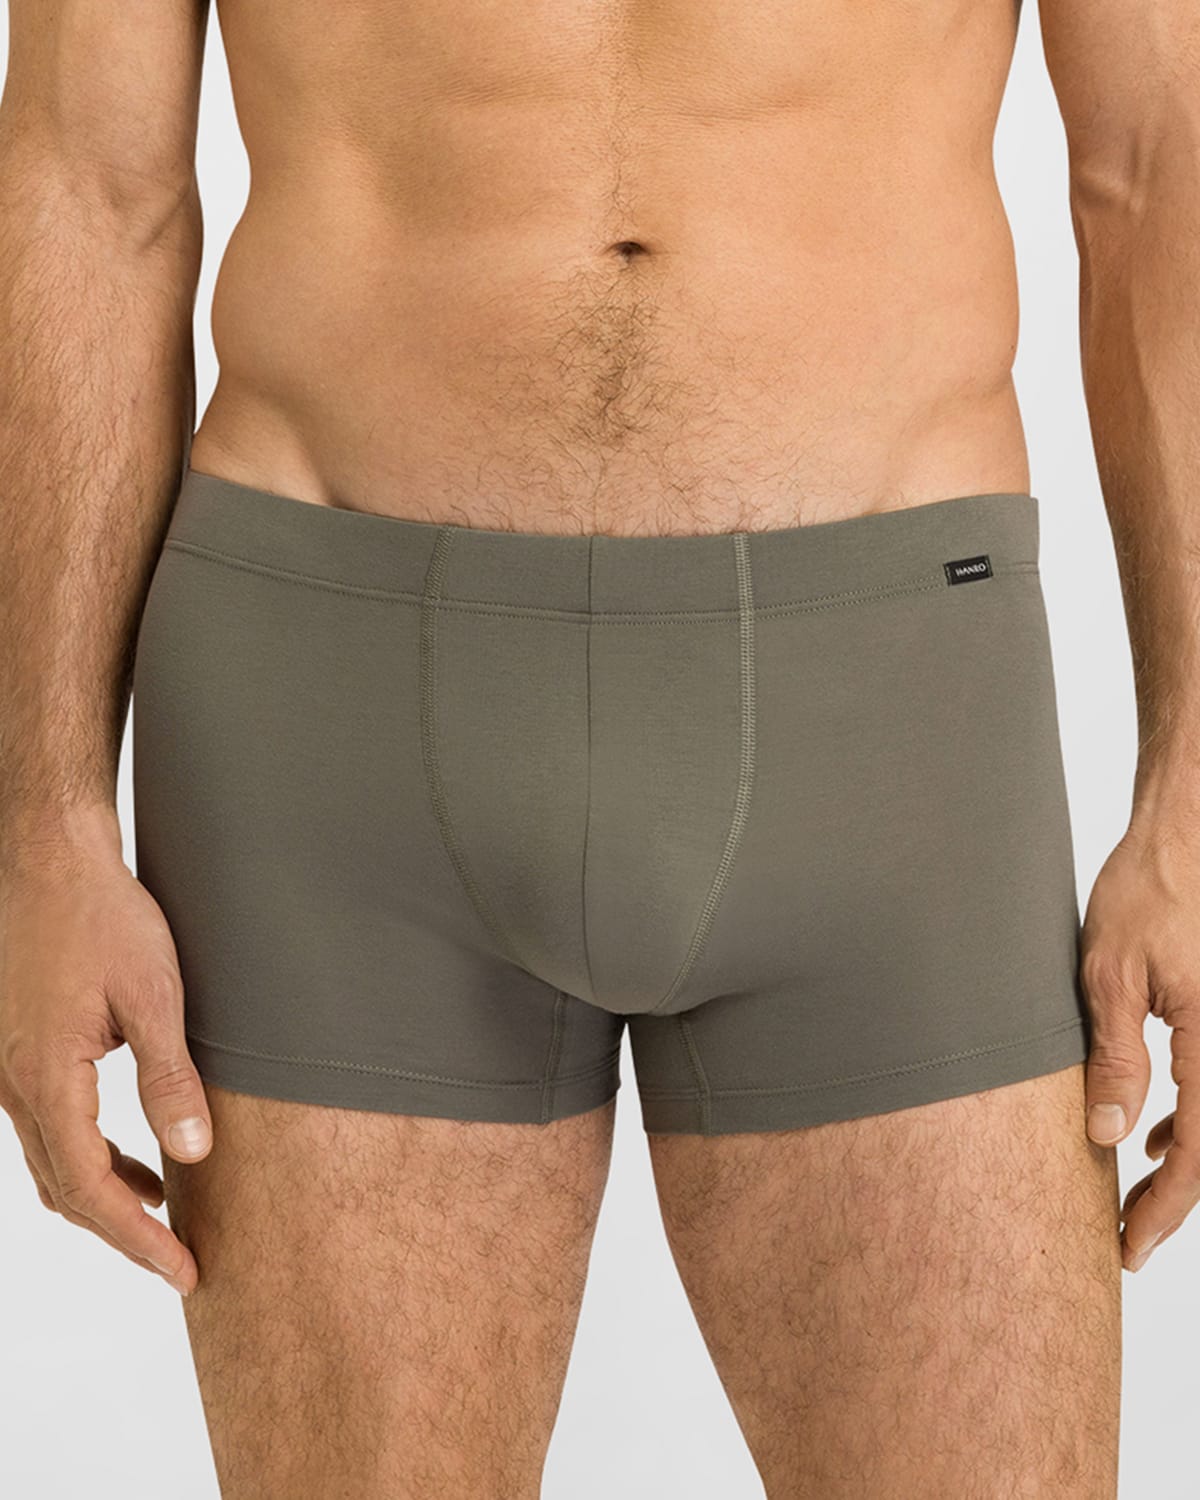 Hanro Cotton Essentials Covered Waistband Boxer Briefs, Pack Of 2 In Antique Gray